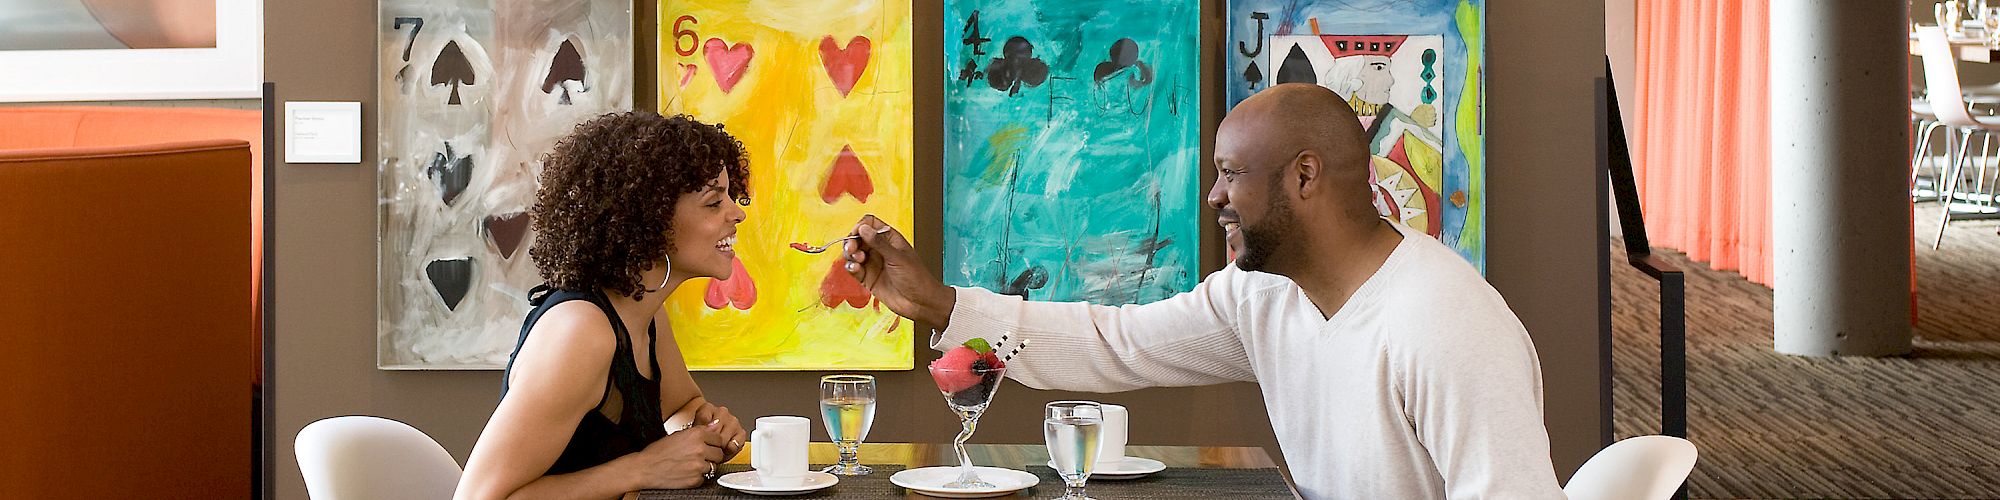 A couple is sitting at a table in a cafe, with large playing card artwork on the wall behind them, sharing a dessert.